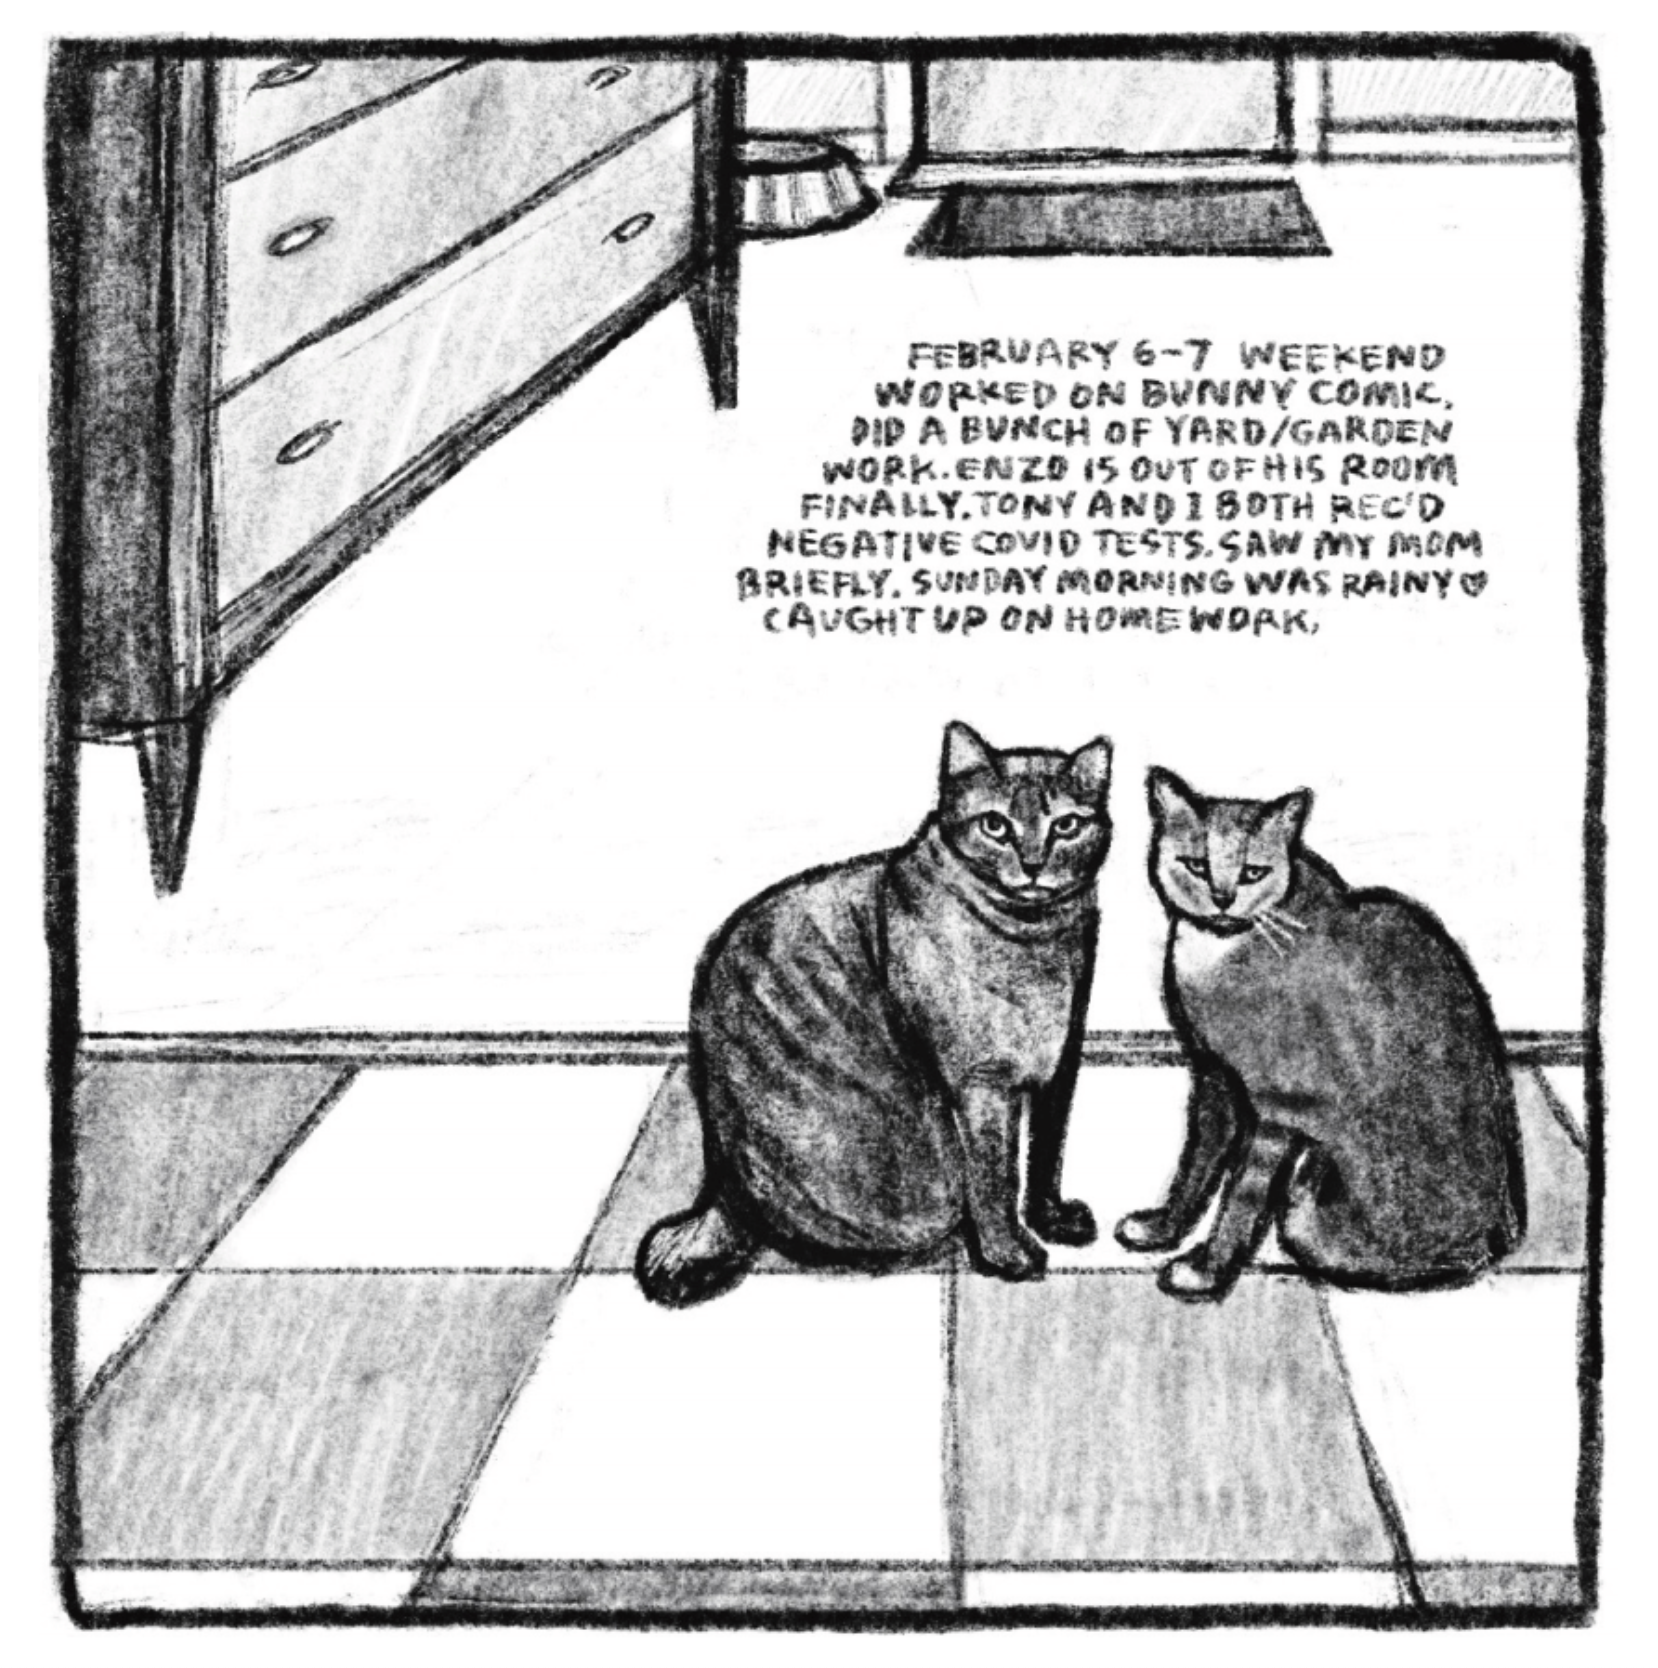 Hold Still Episode 7, panel 3 "February 6-7 weekend / Worked on Bunny comic. Did a bunch of yard/garden work. Enzo is out of his room finally. Tony and I both rec'd negative covid tests. Saw my mom briefly. Sunday morning was rainy <3 Caught up on homework." Drawing of two cats sitting on a rug, looking at the viewer.